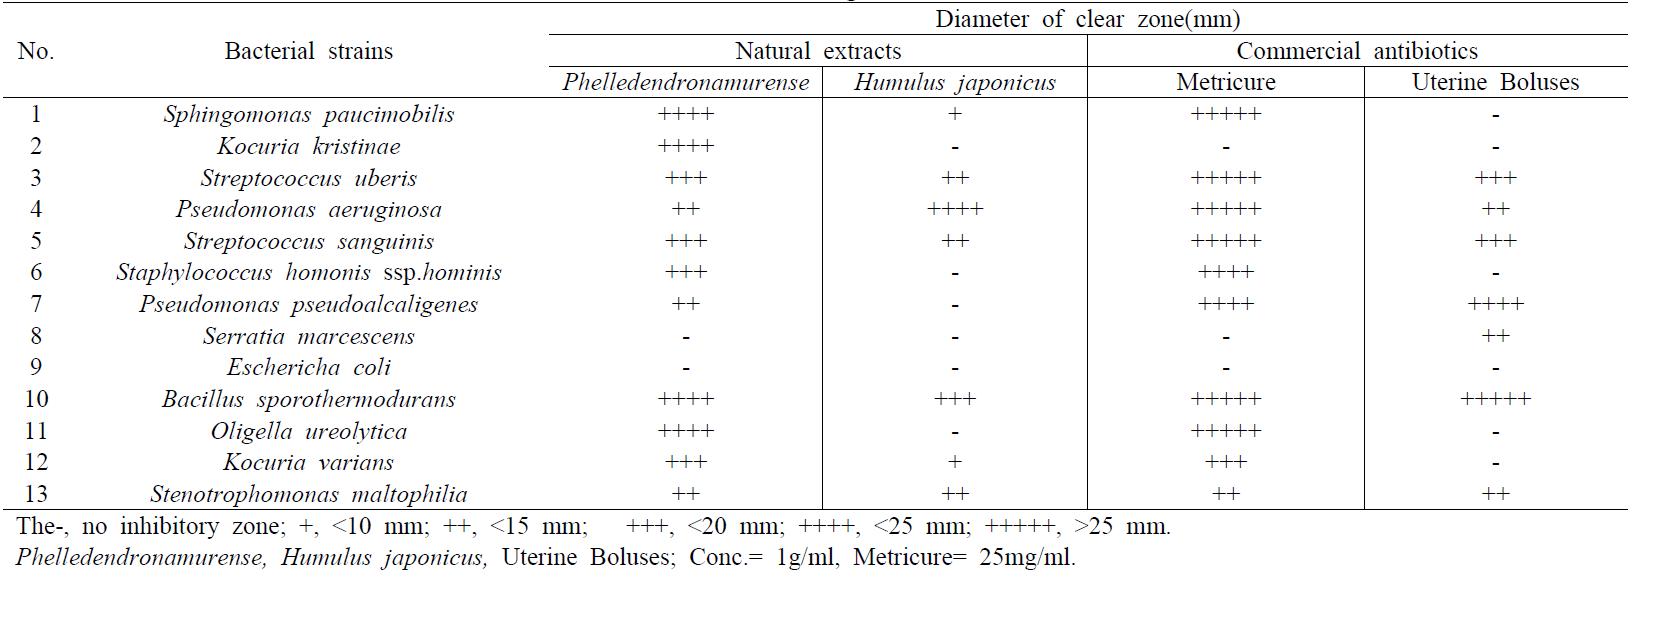 Antimicrobial effect of natral extracts and commercial antibiotics against difference bacterial strains isolated from Hanwoo semen